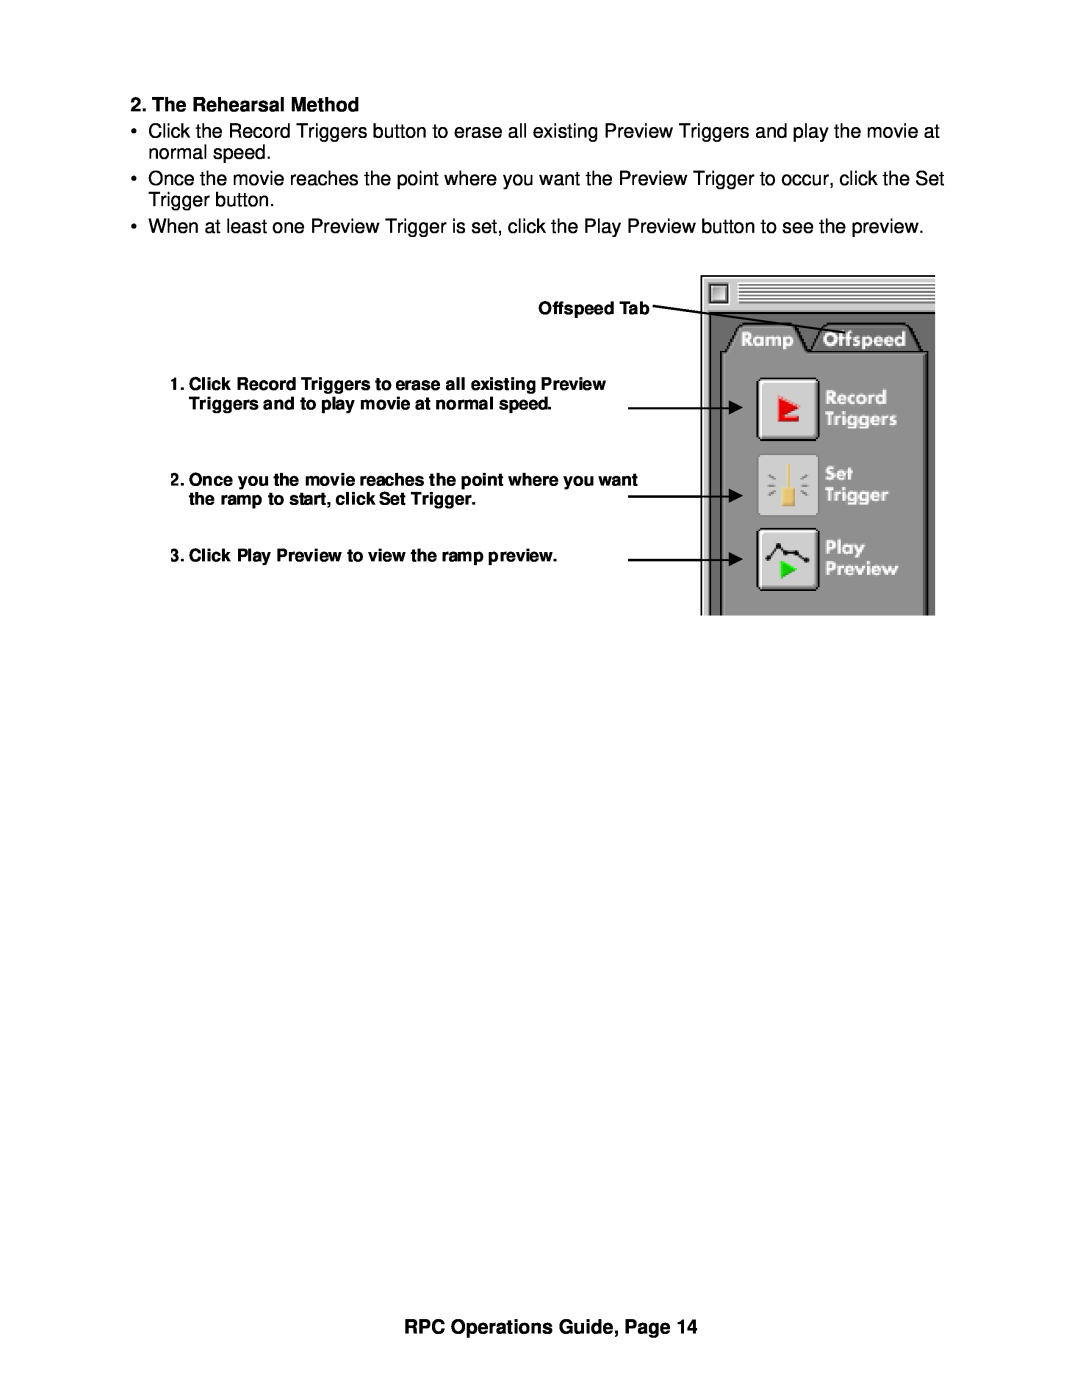 ARRI ARRI Ramp Preview Controller manual The Rehearsal Method, RPC Operations Guide, Page, Offspeed Tab 